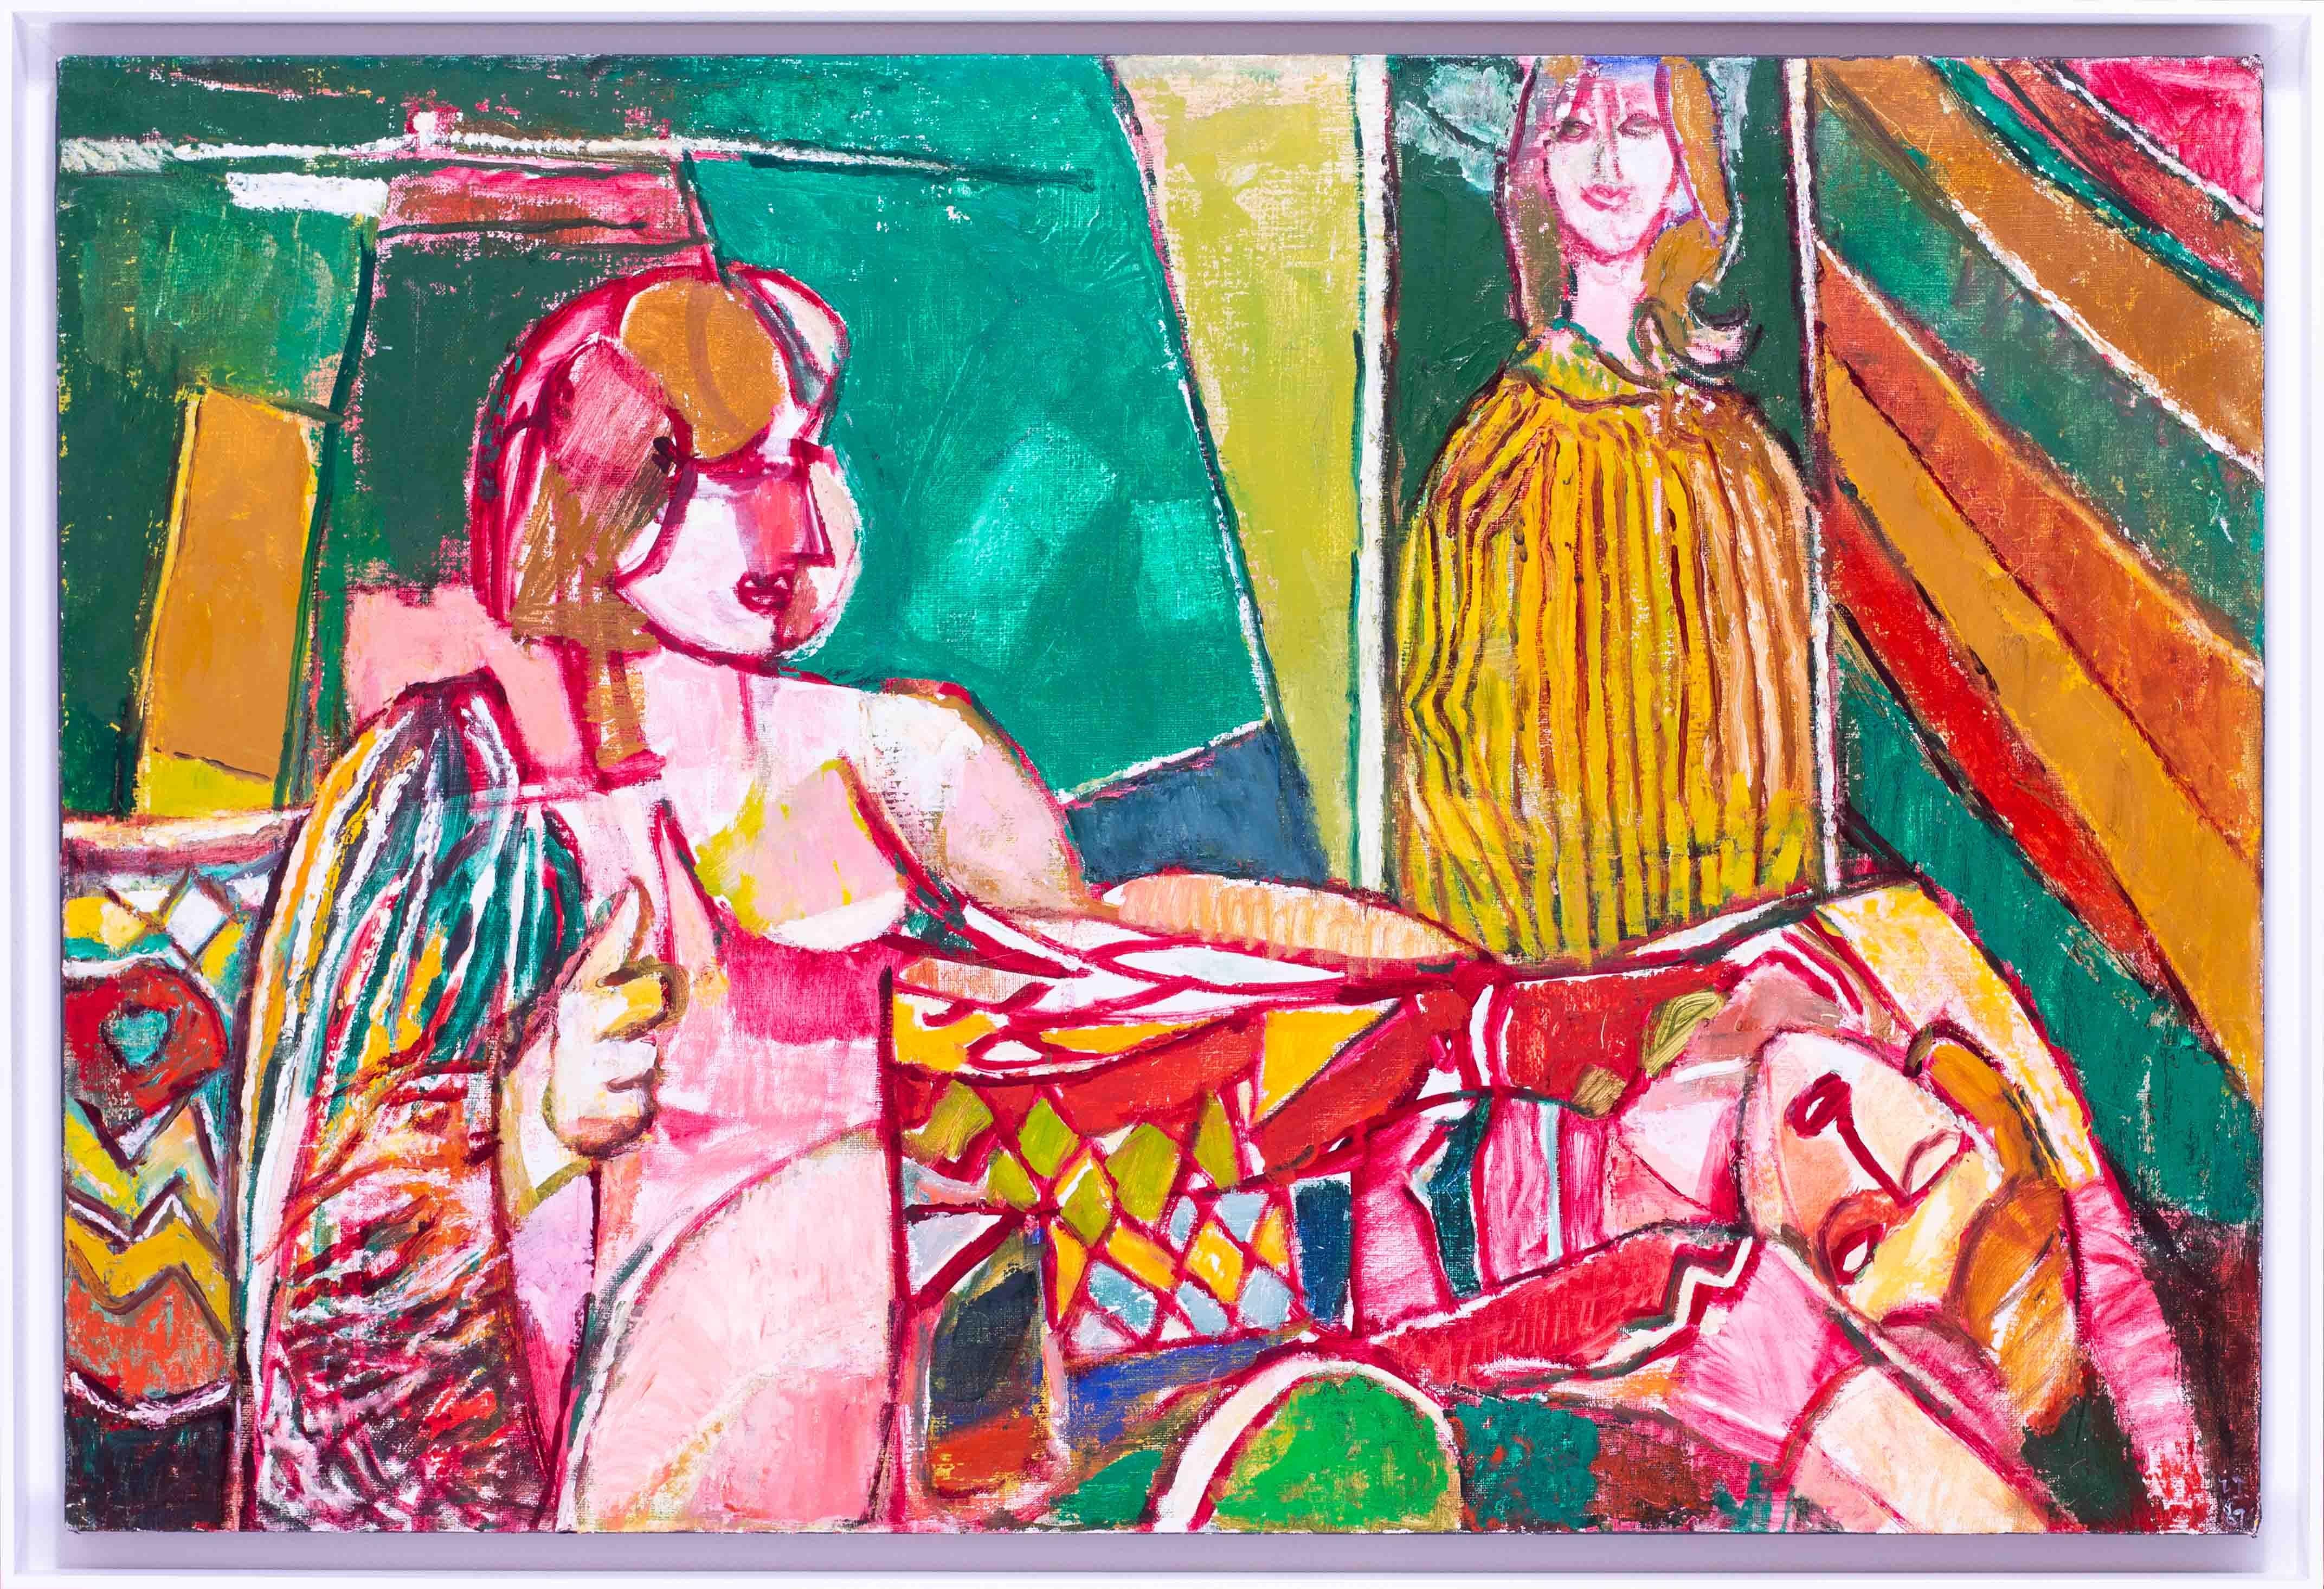 This captivating artwork exemplifies the Ewart John's bold and vibrant style, exuding a sense of energy and playfulness. Set against a varied green backdrop, the nudes in the foreground command attention with their graceful presence. The composition